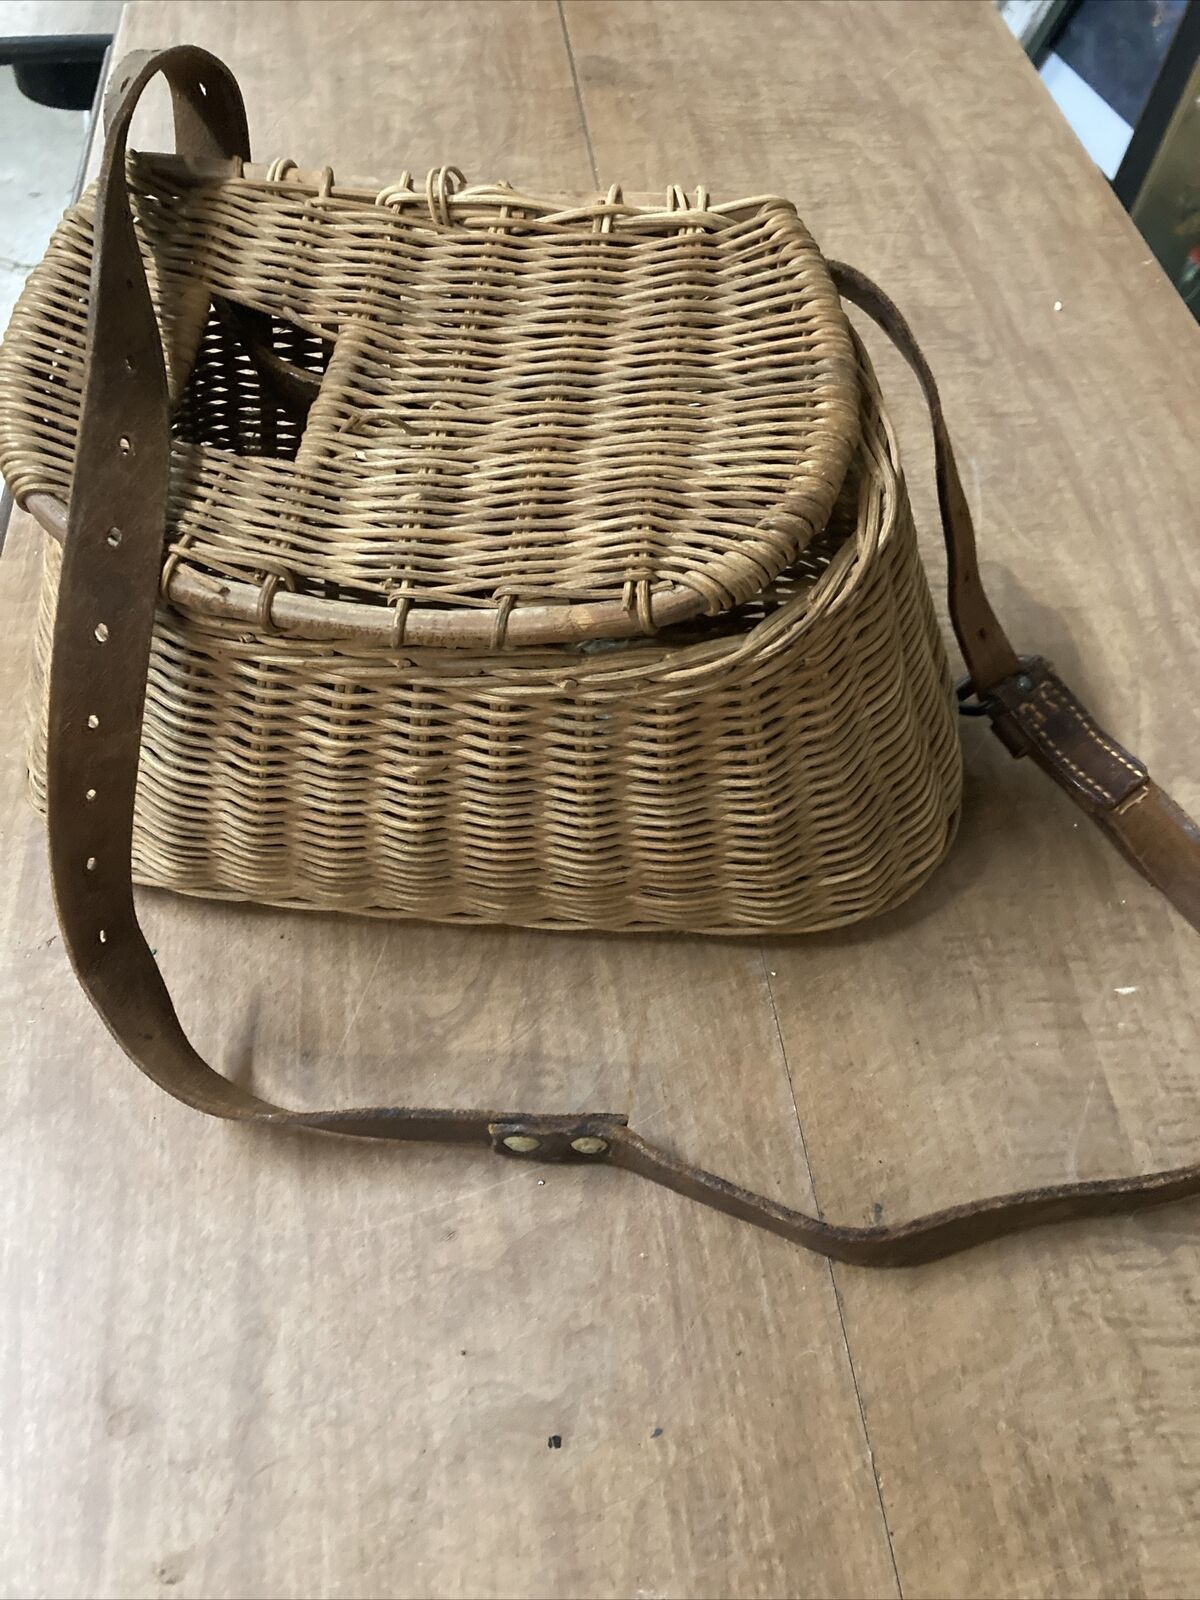 Antique Wicker Fishing Basket With Leather Shoulder Strap Rare Woven Vintage